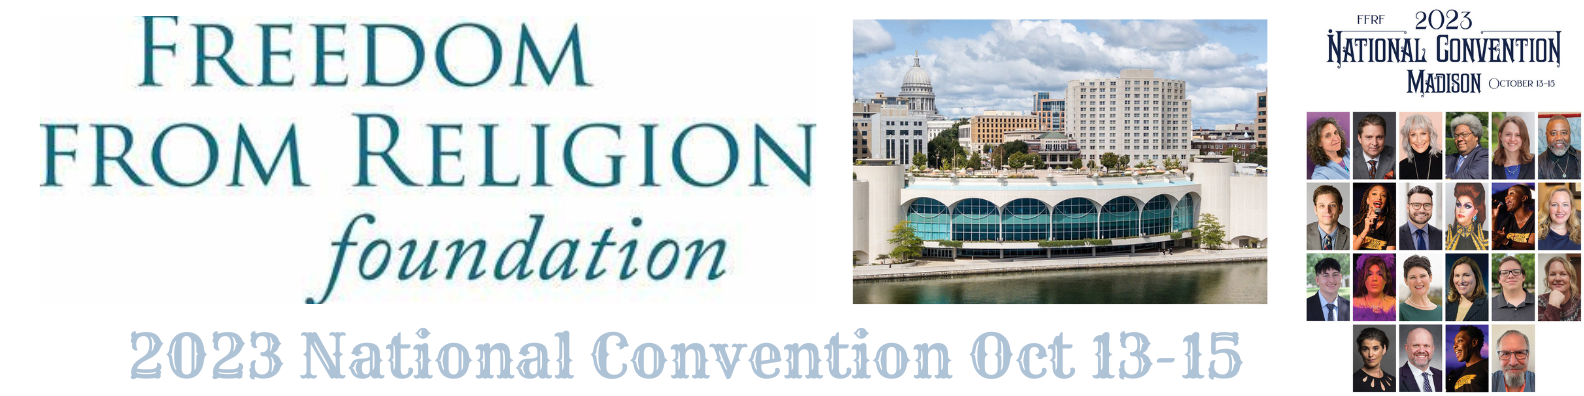 Freedom From Religion Foundation 2023 National Convention October 13-15